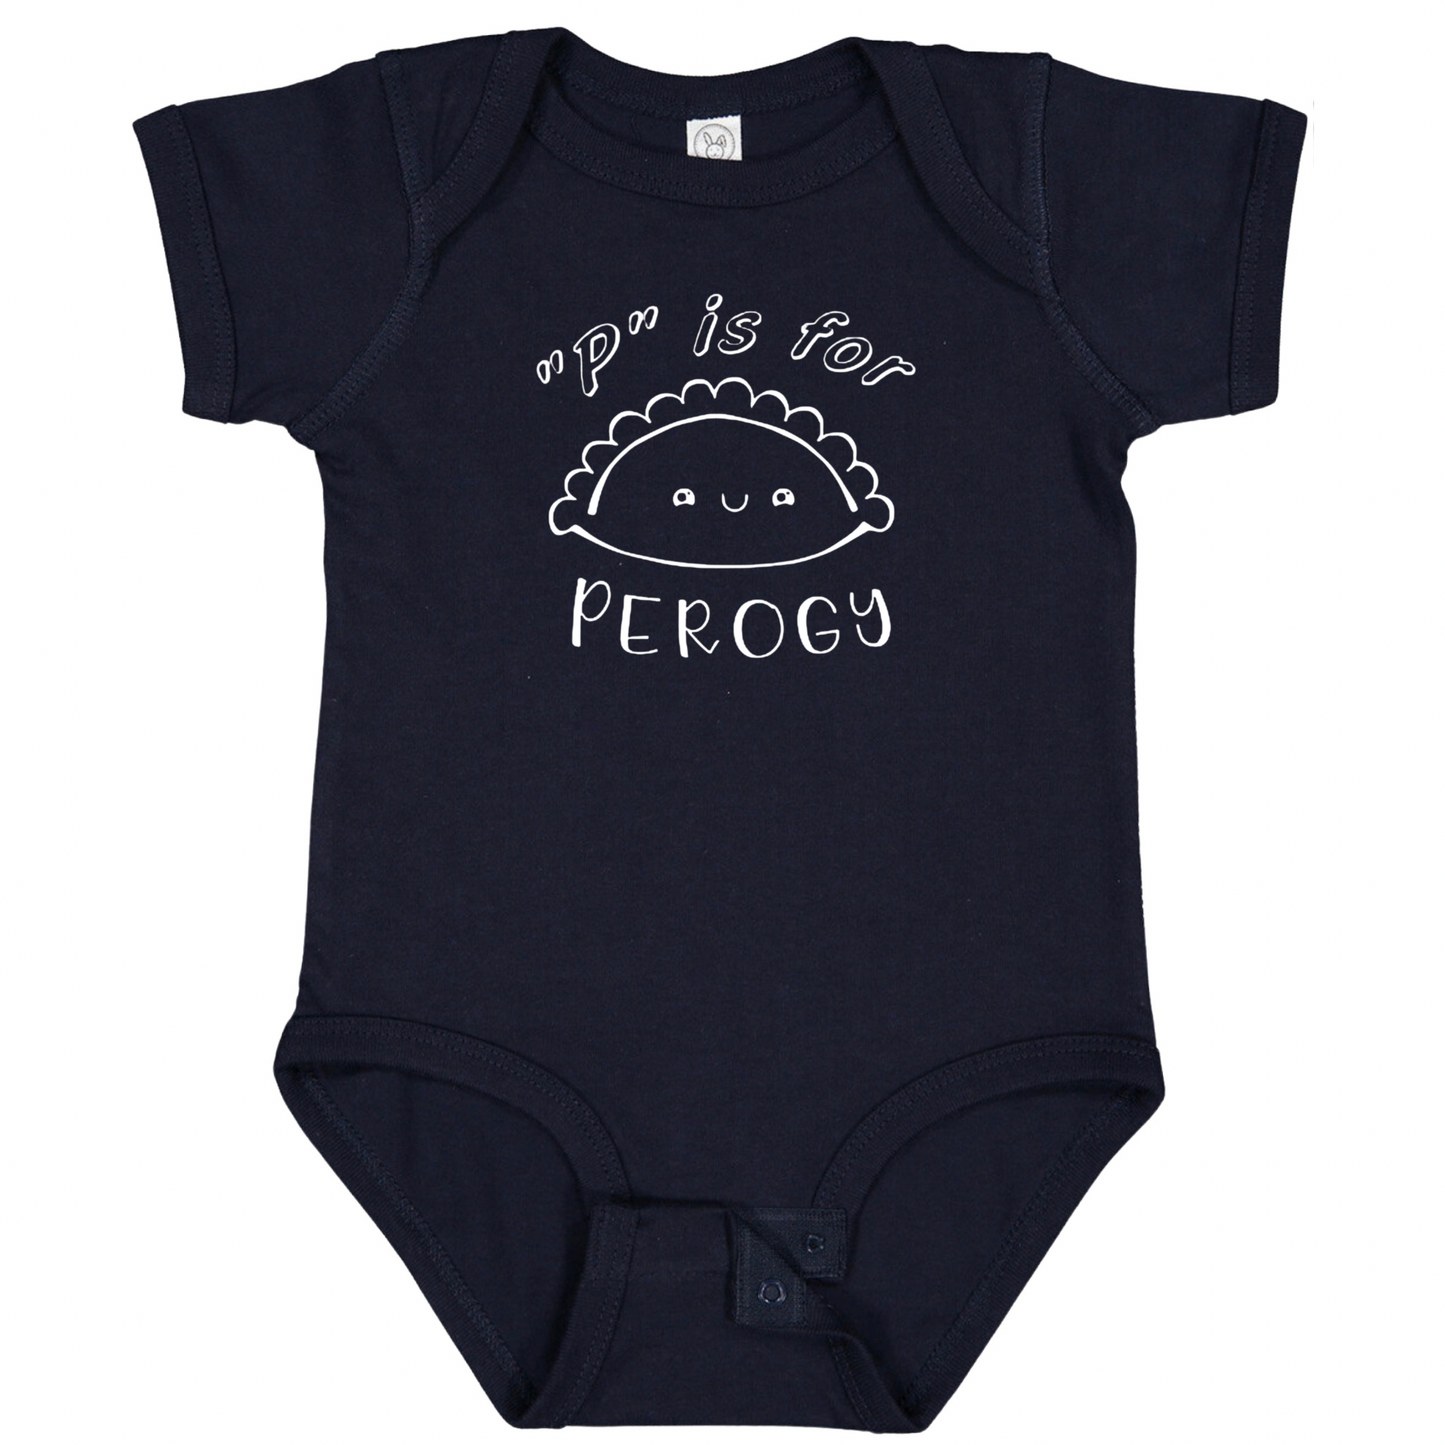 “P” IS FOR PEROGY (White Font)- Short Sleeve Onesie